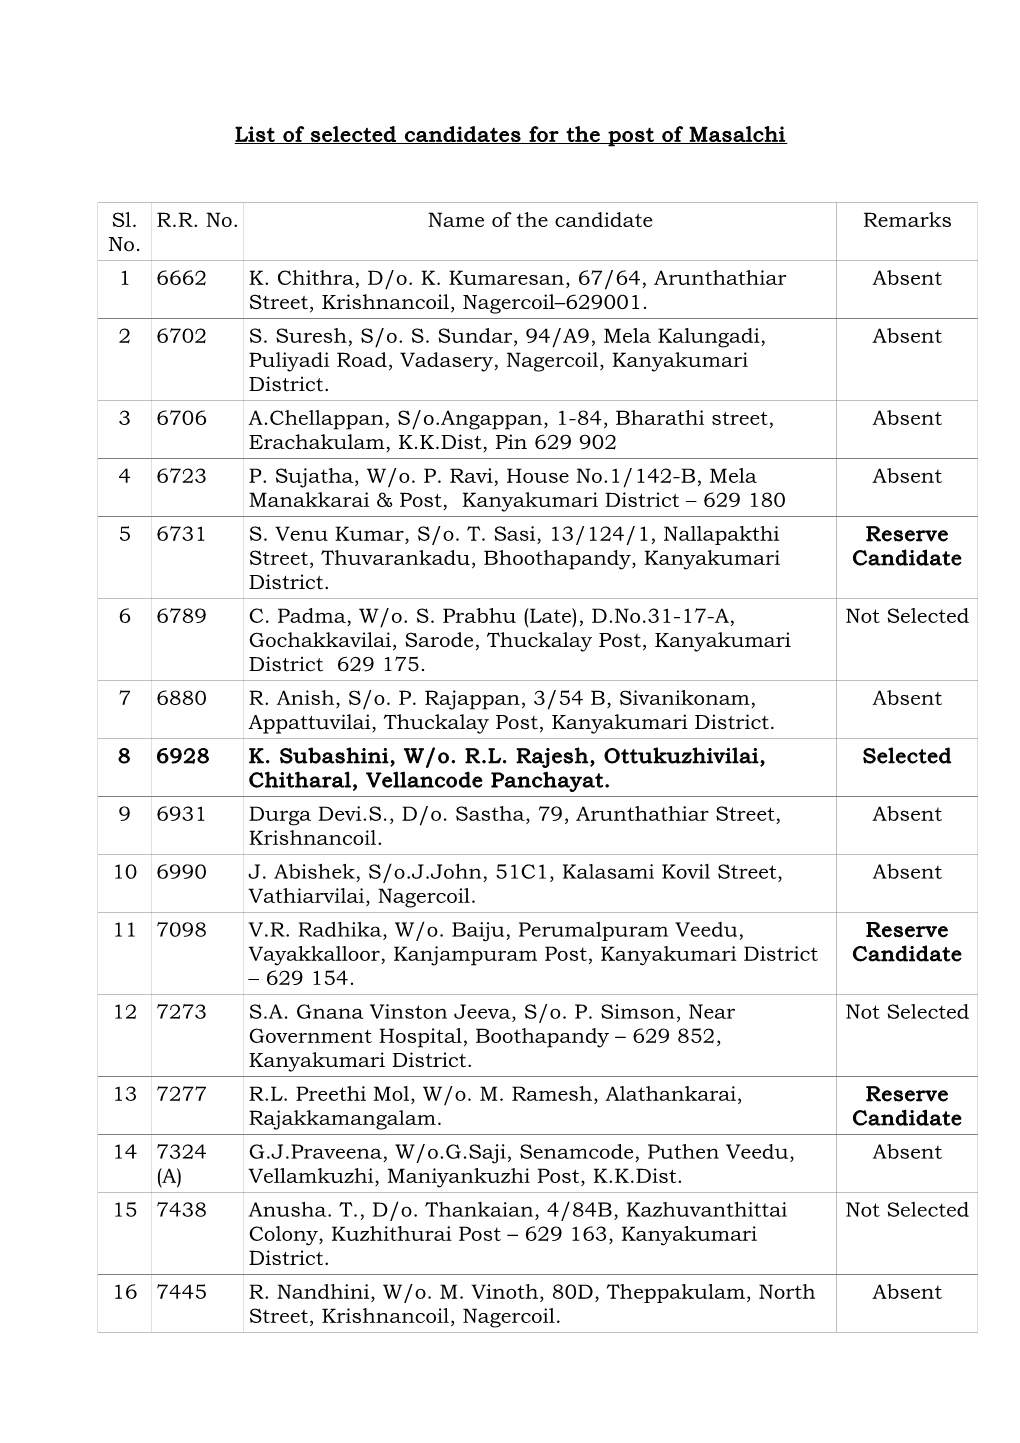 List of Selected Candidates for the Post of Masalchi Sl. No. R.R. No. Name